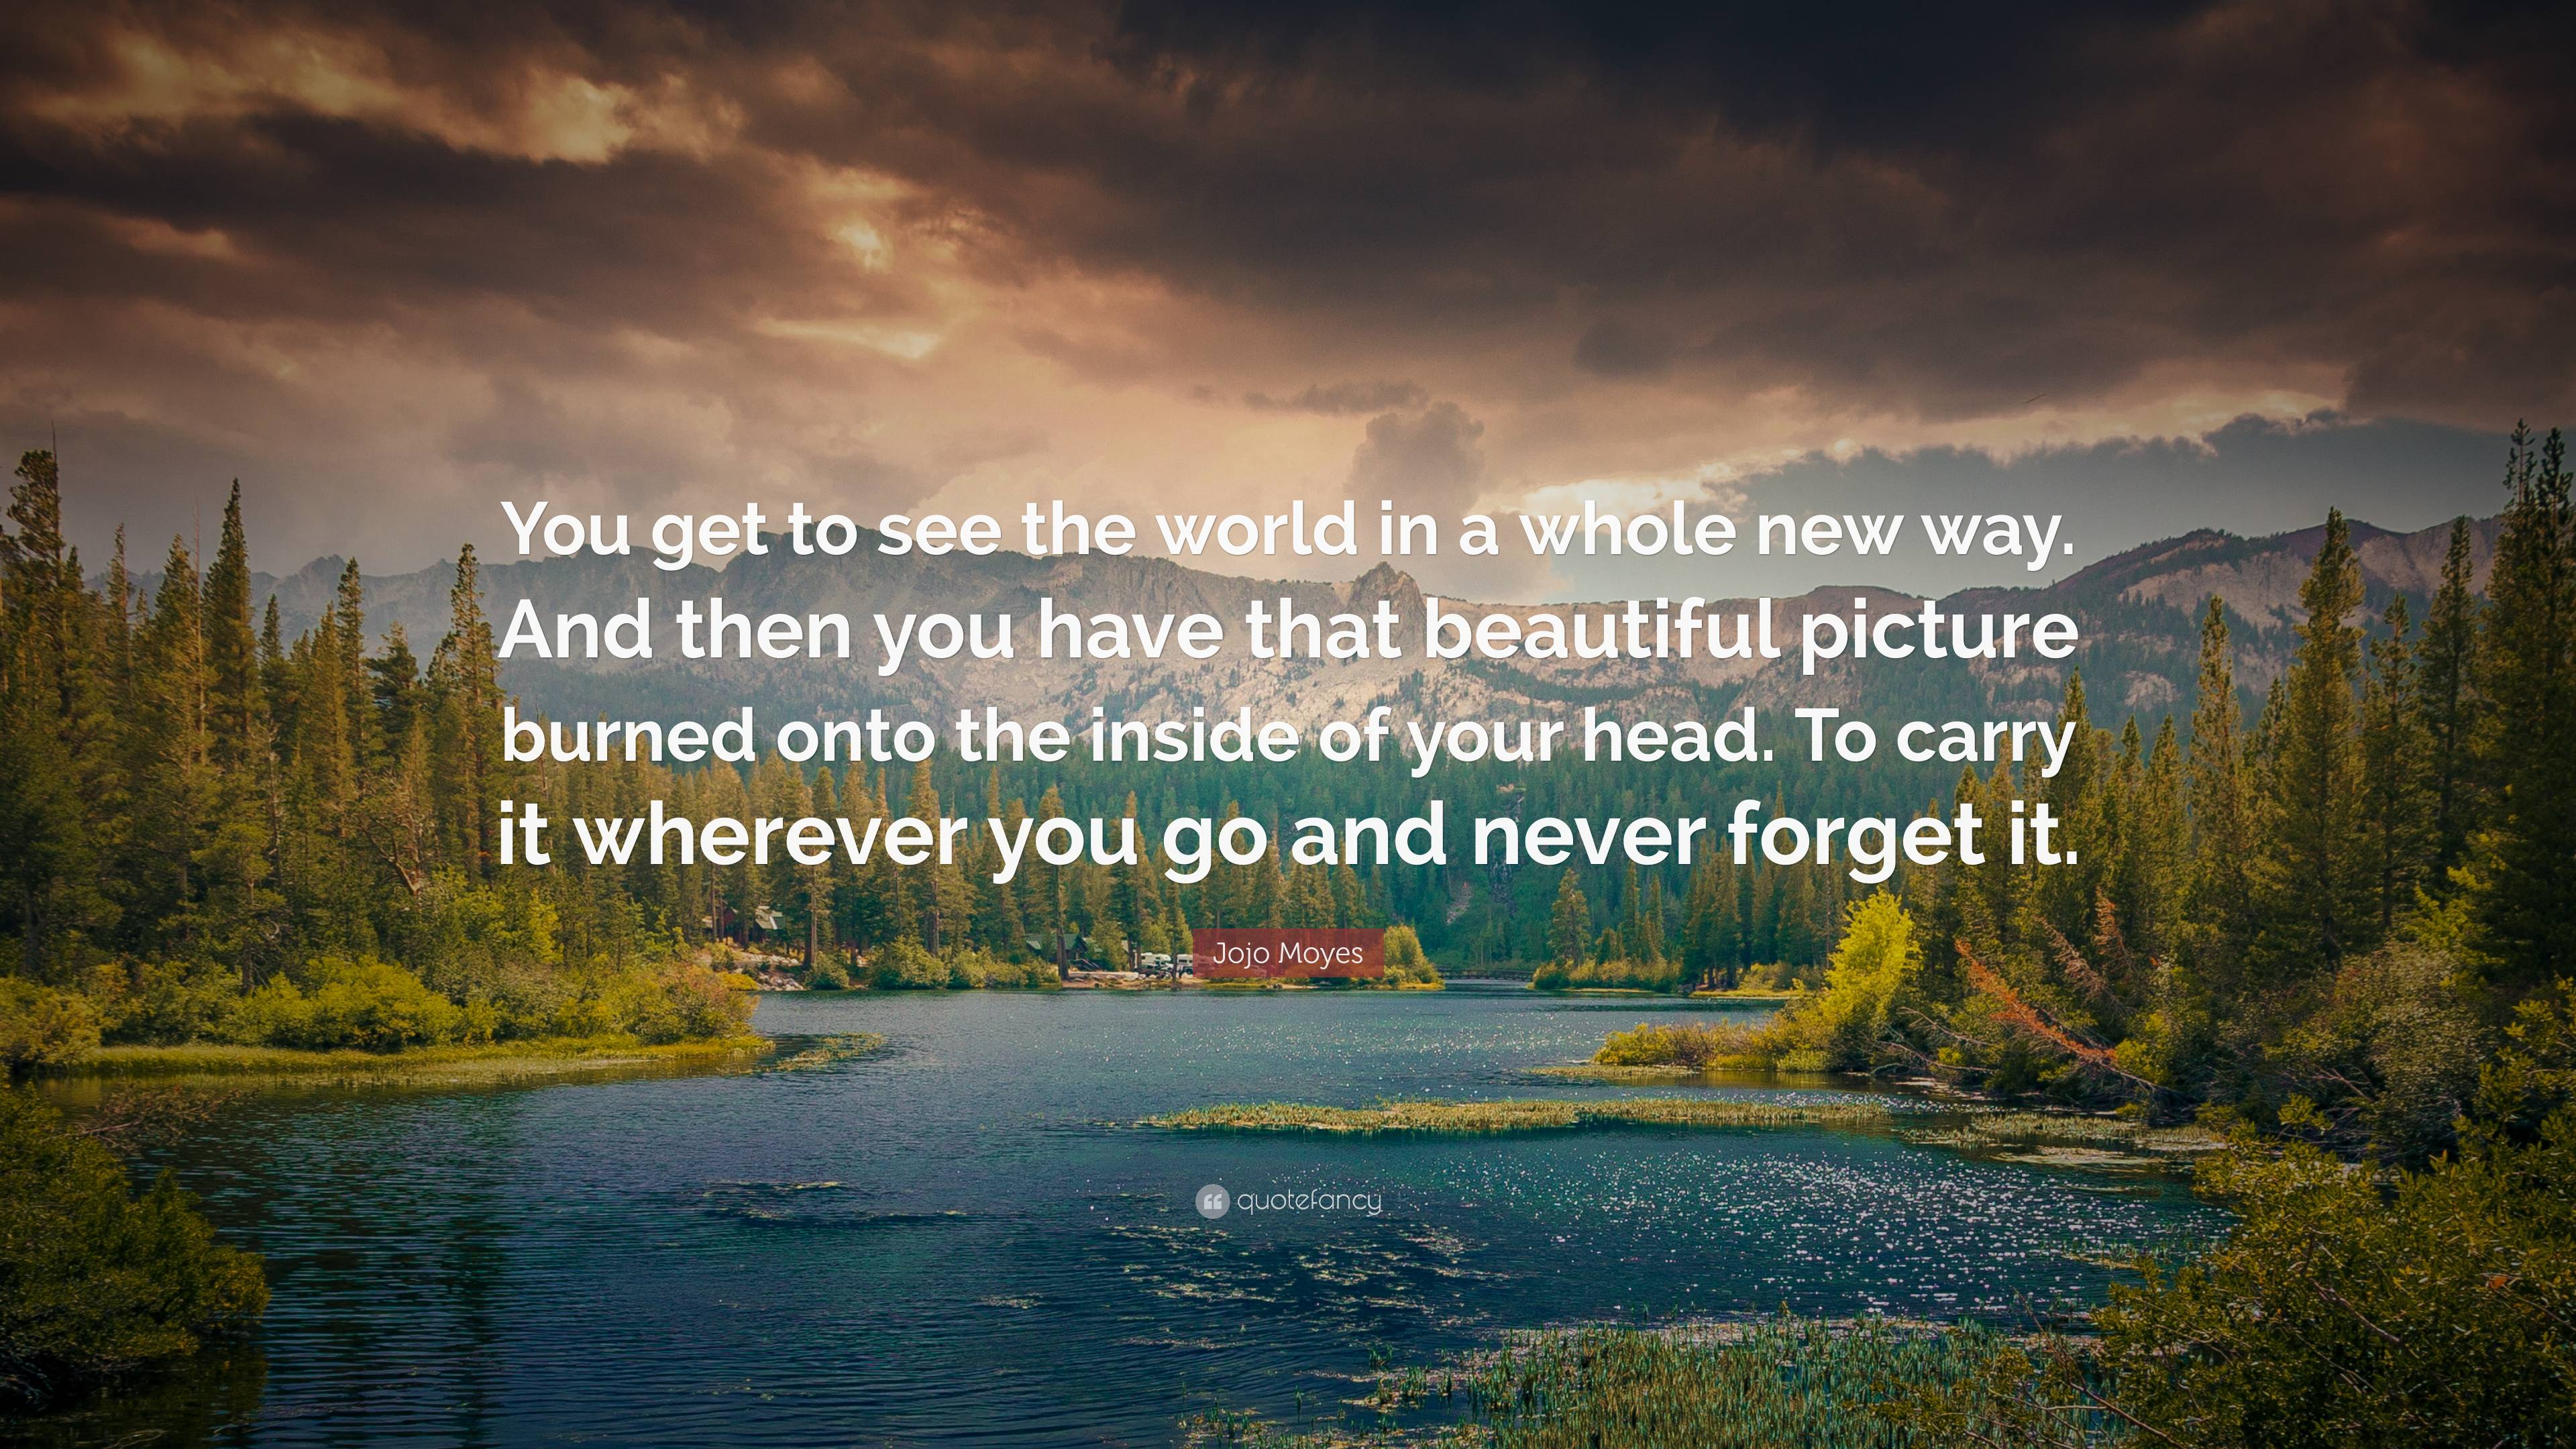 Jojo Moyes Quote: “You get to see the world in a whole new way. And ...